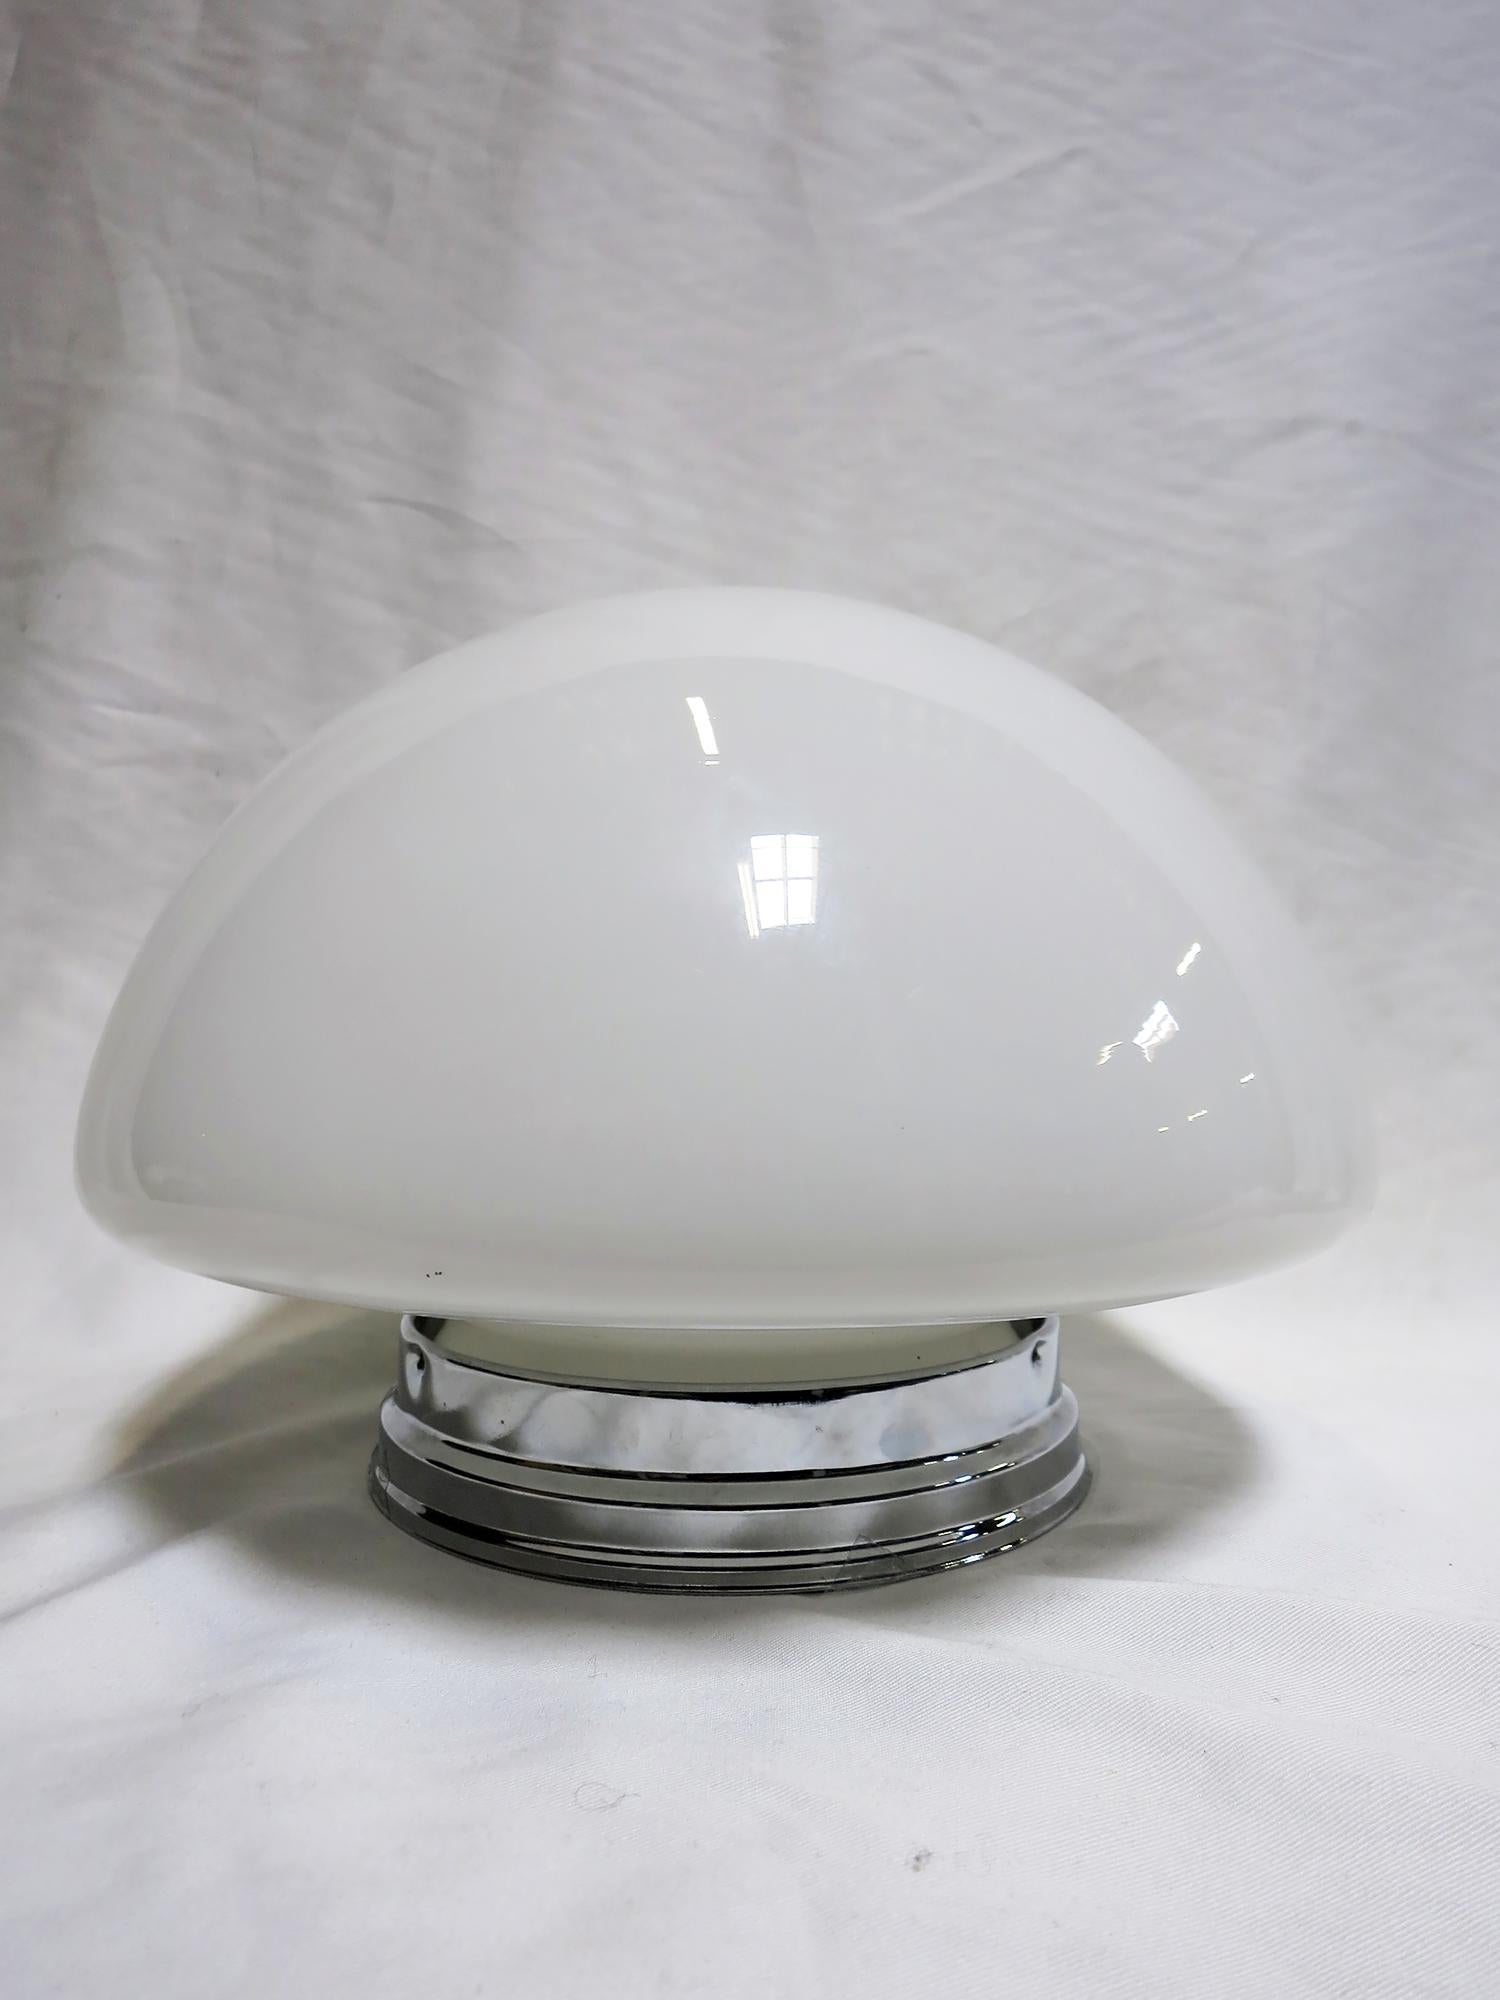 Once used everywhere from classrooms, libraries and courthouses alike, schoolhouse globes offered a practical and utilitarian design with solid, hard-working ambient lighting. Our globe features a rounded mushroom-shape in Classic white milk glass